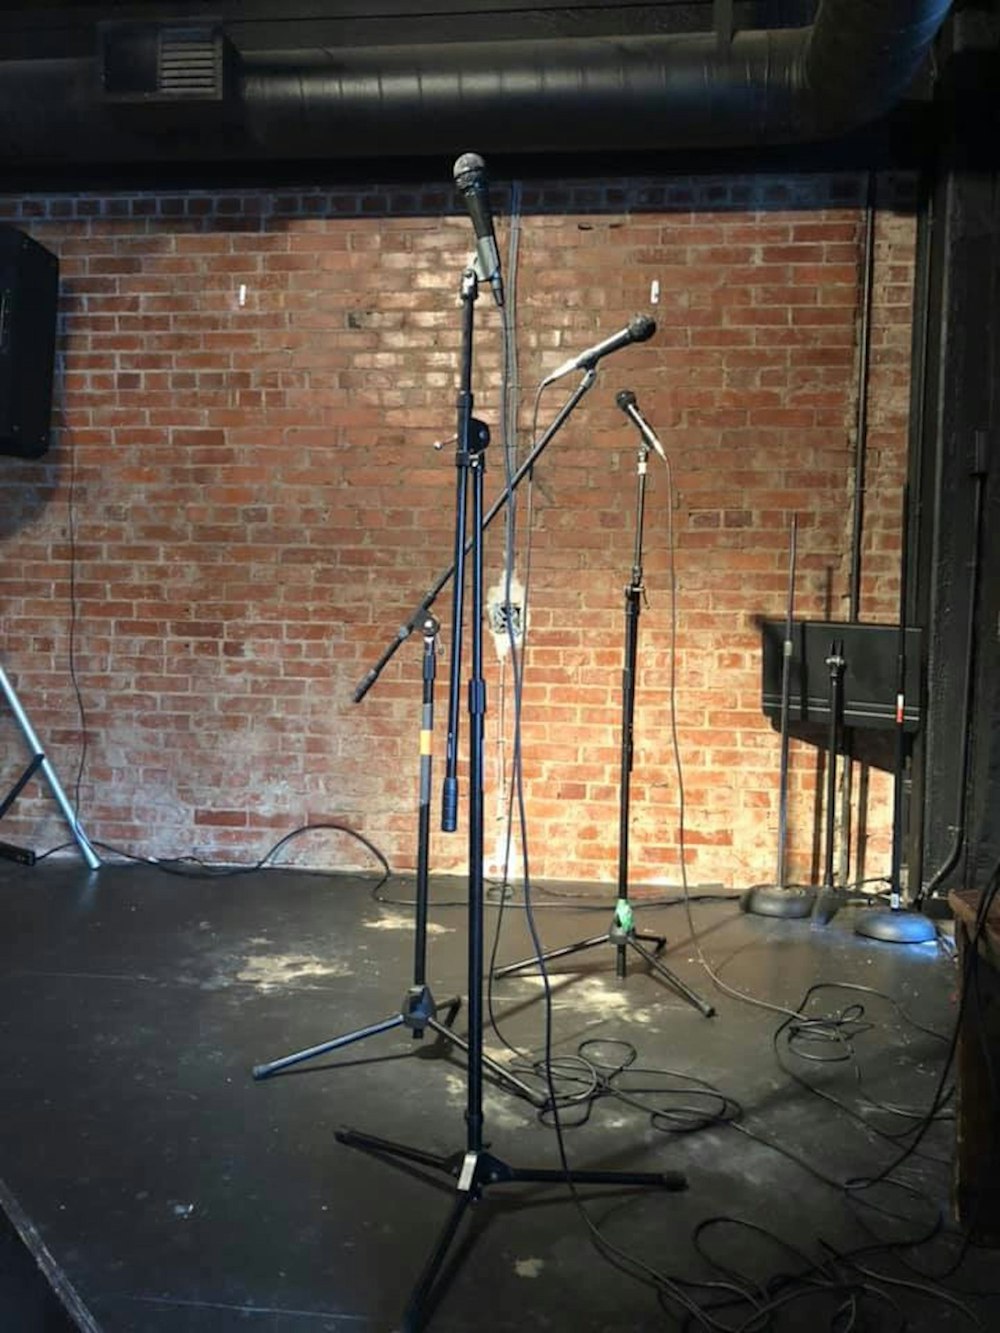 a set of microphones in front of a brick wall